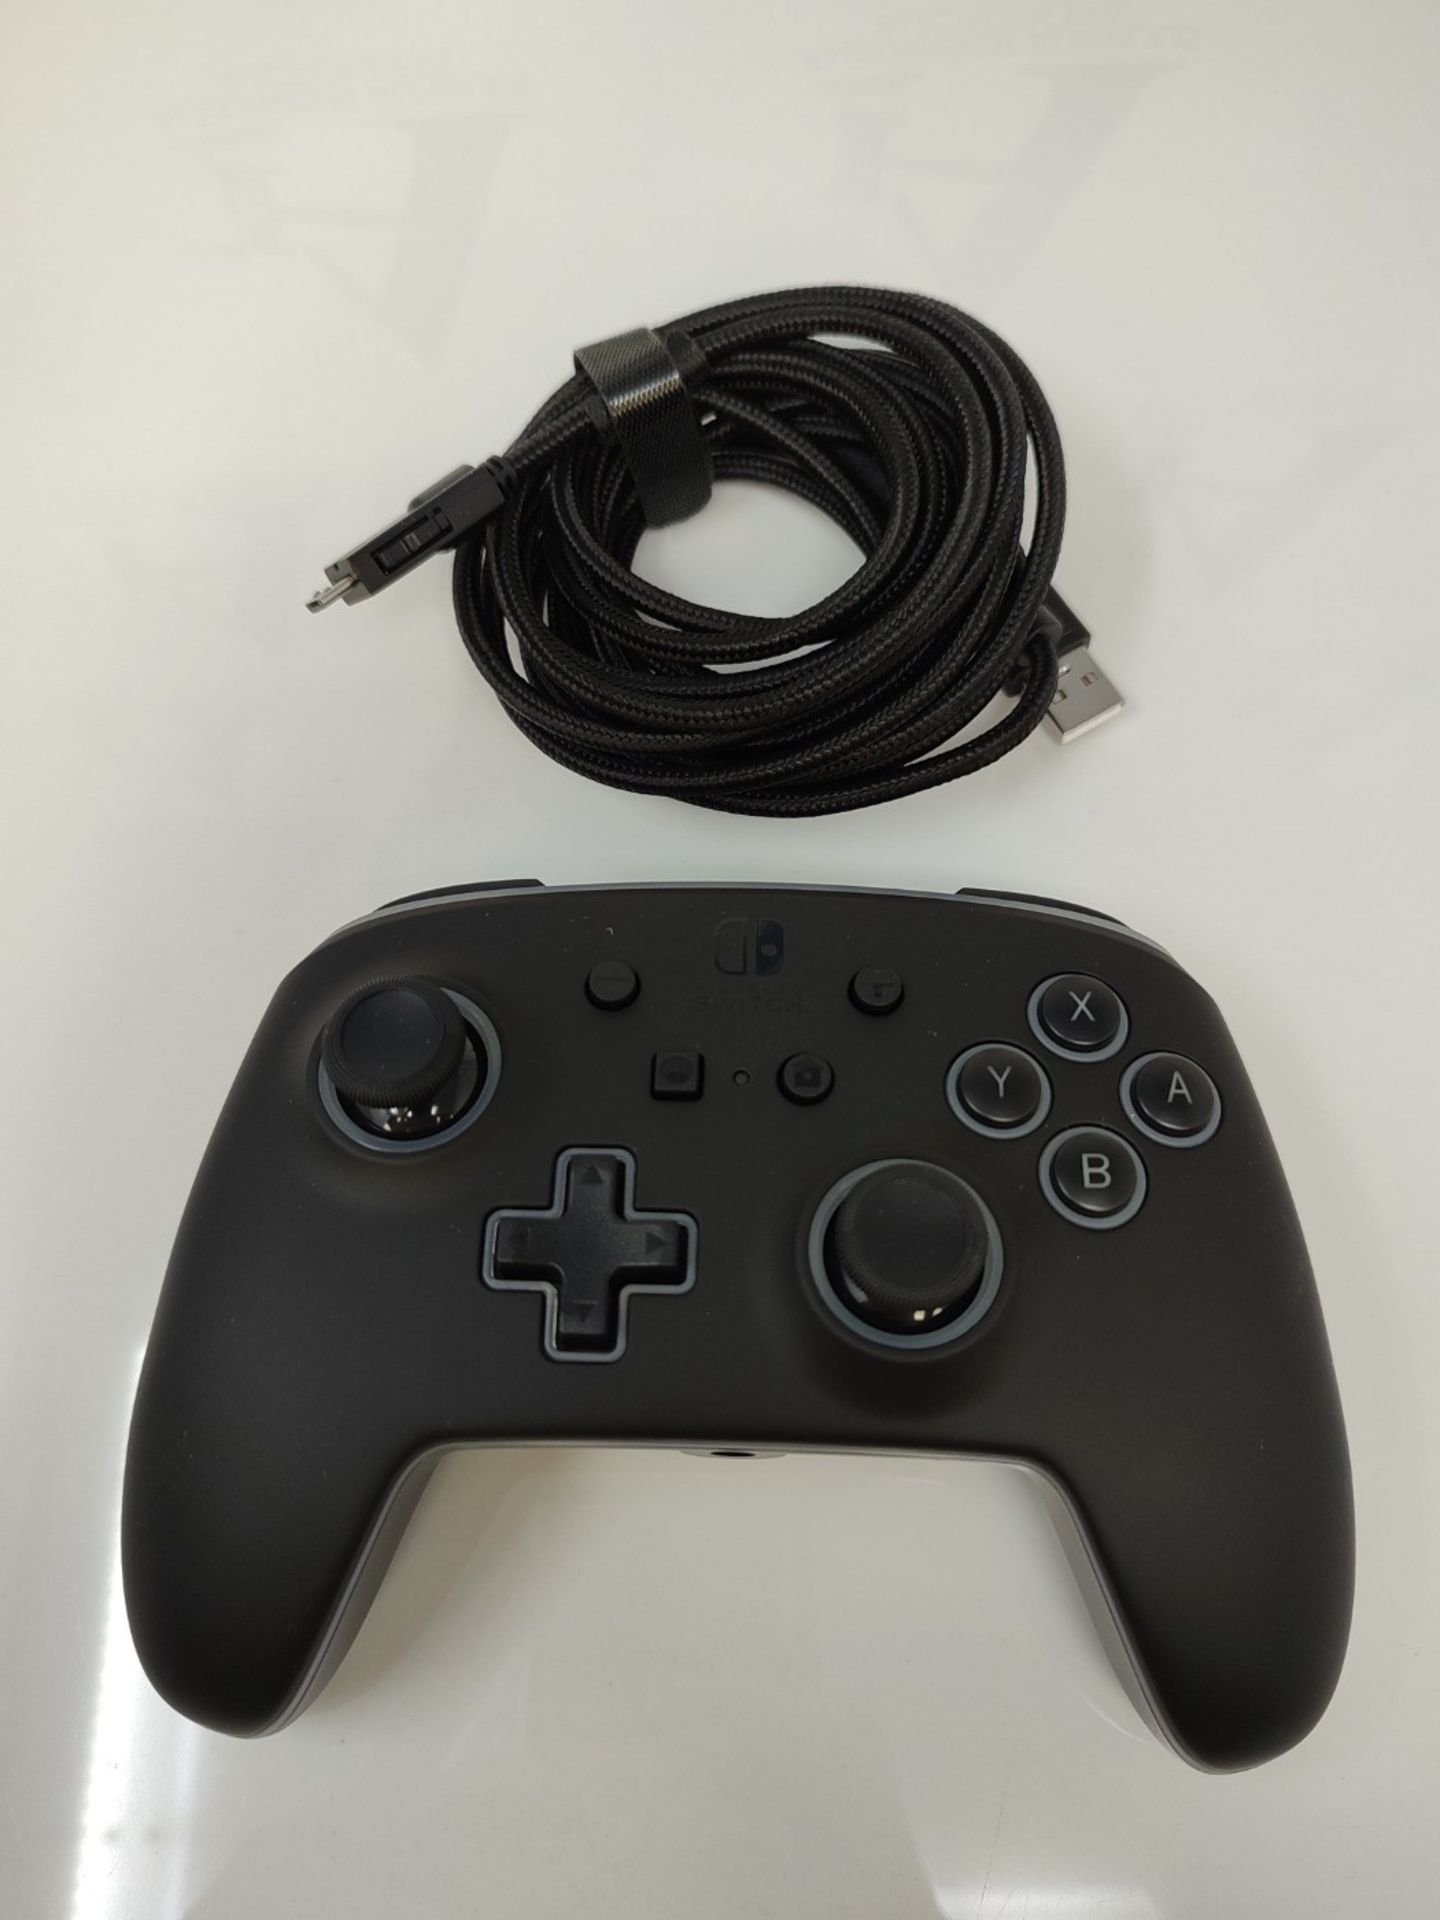 PowerA Advanced Wired Controller Spectra for Nintendo Switch - Nintendo Switch - Image 3 of 3